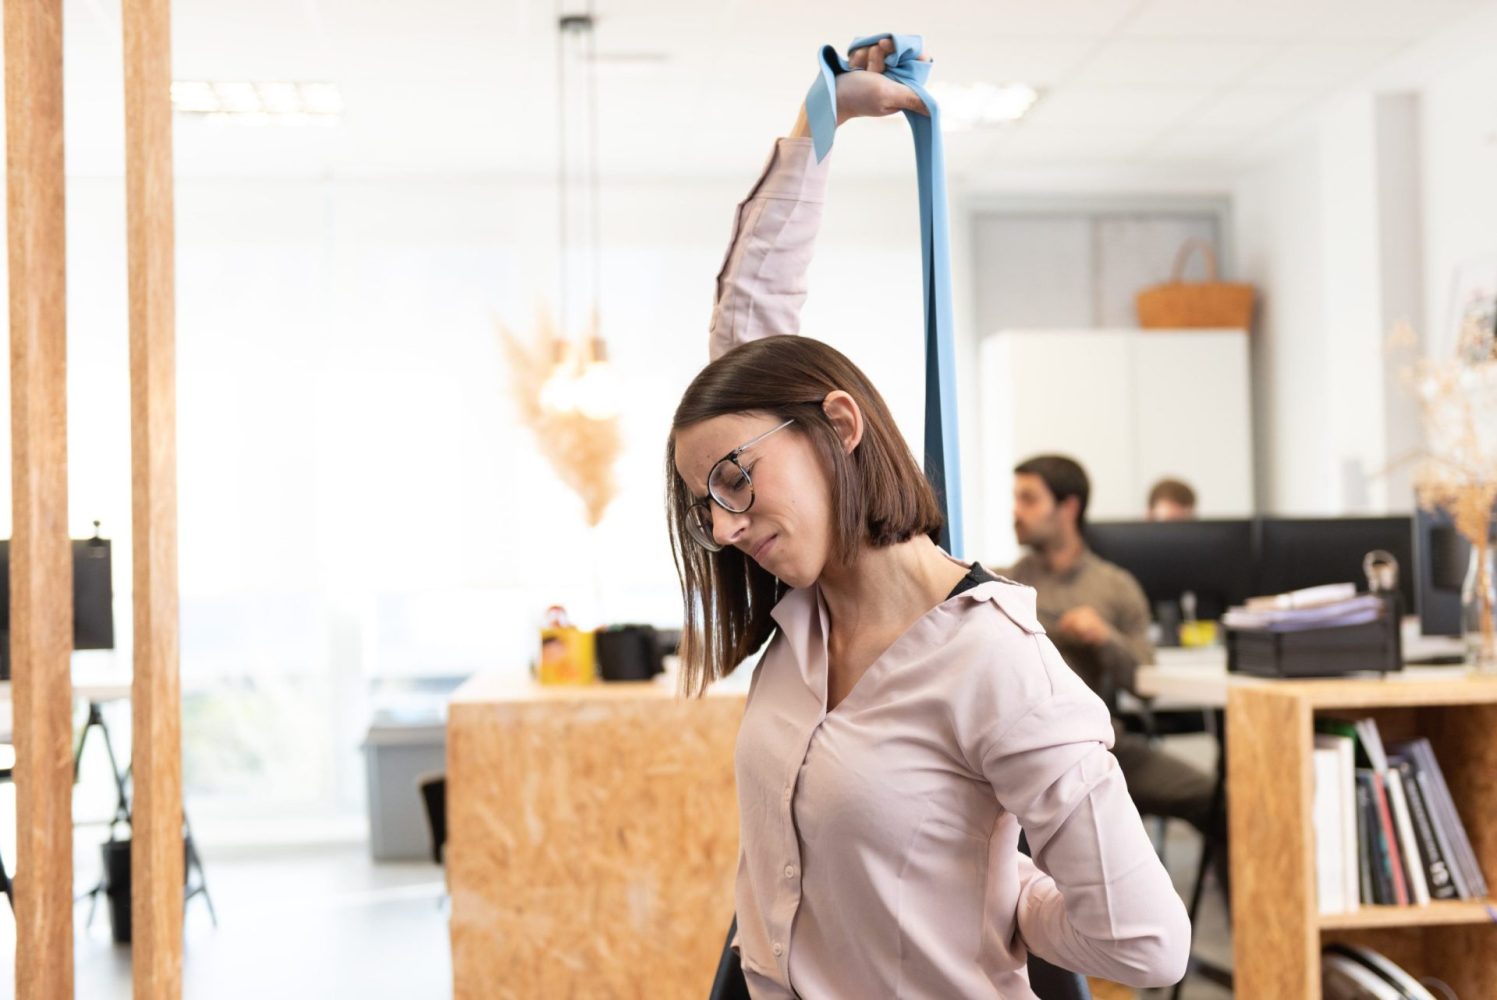 woman-with-backache-back-pain-stretching-with-pilates-rubber-band-office-min